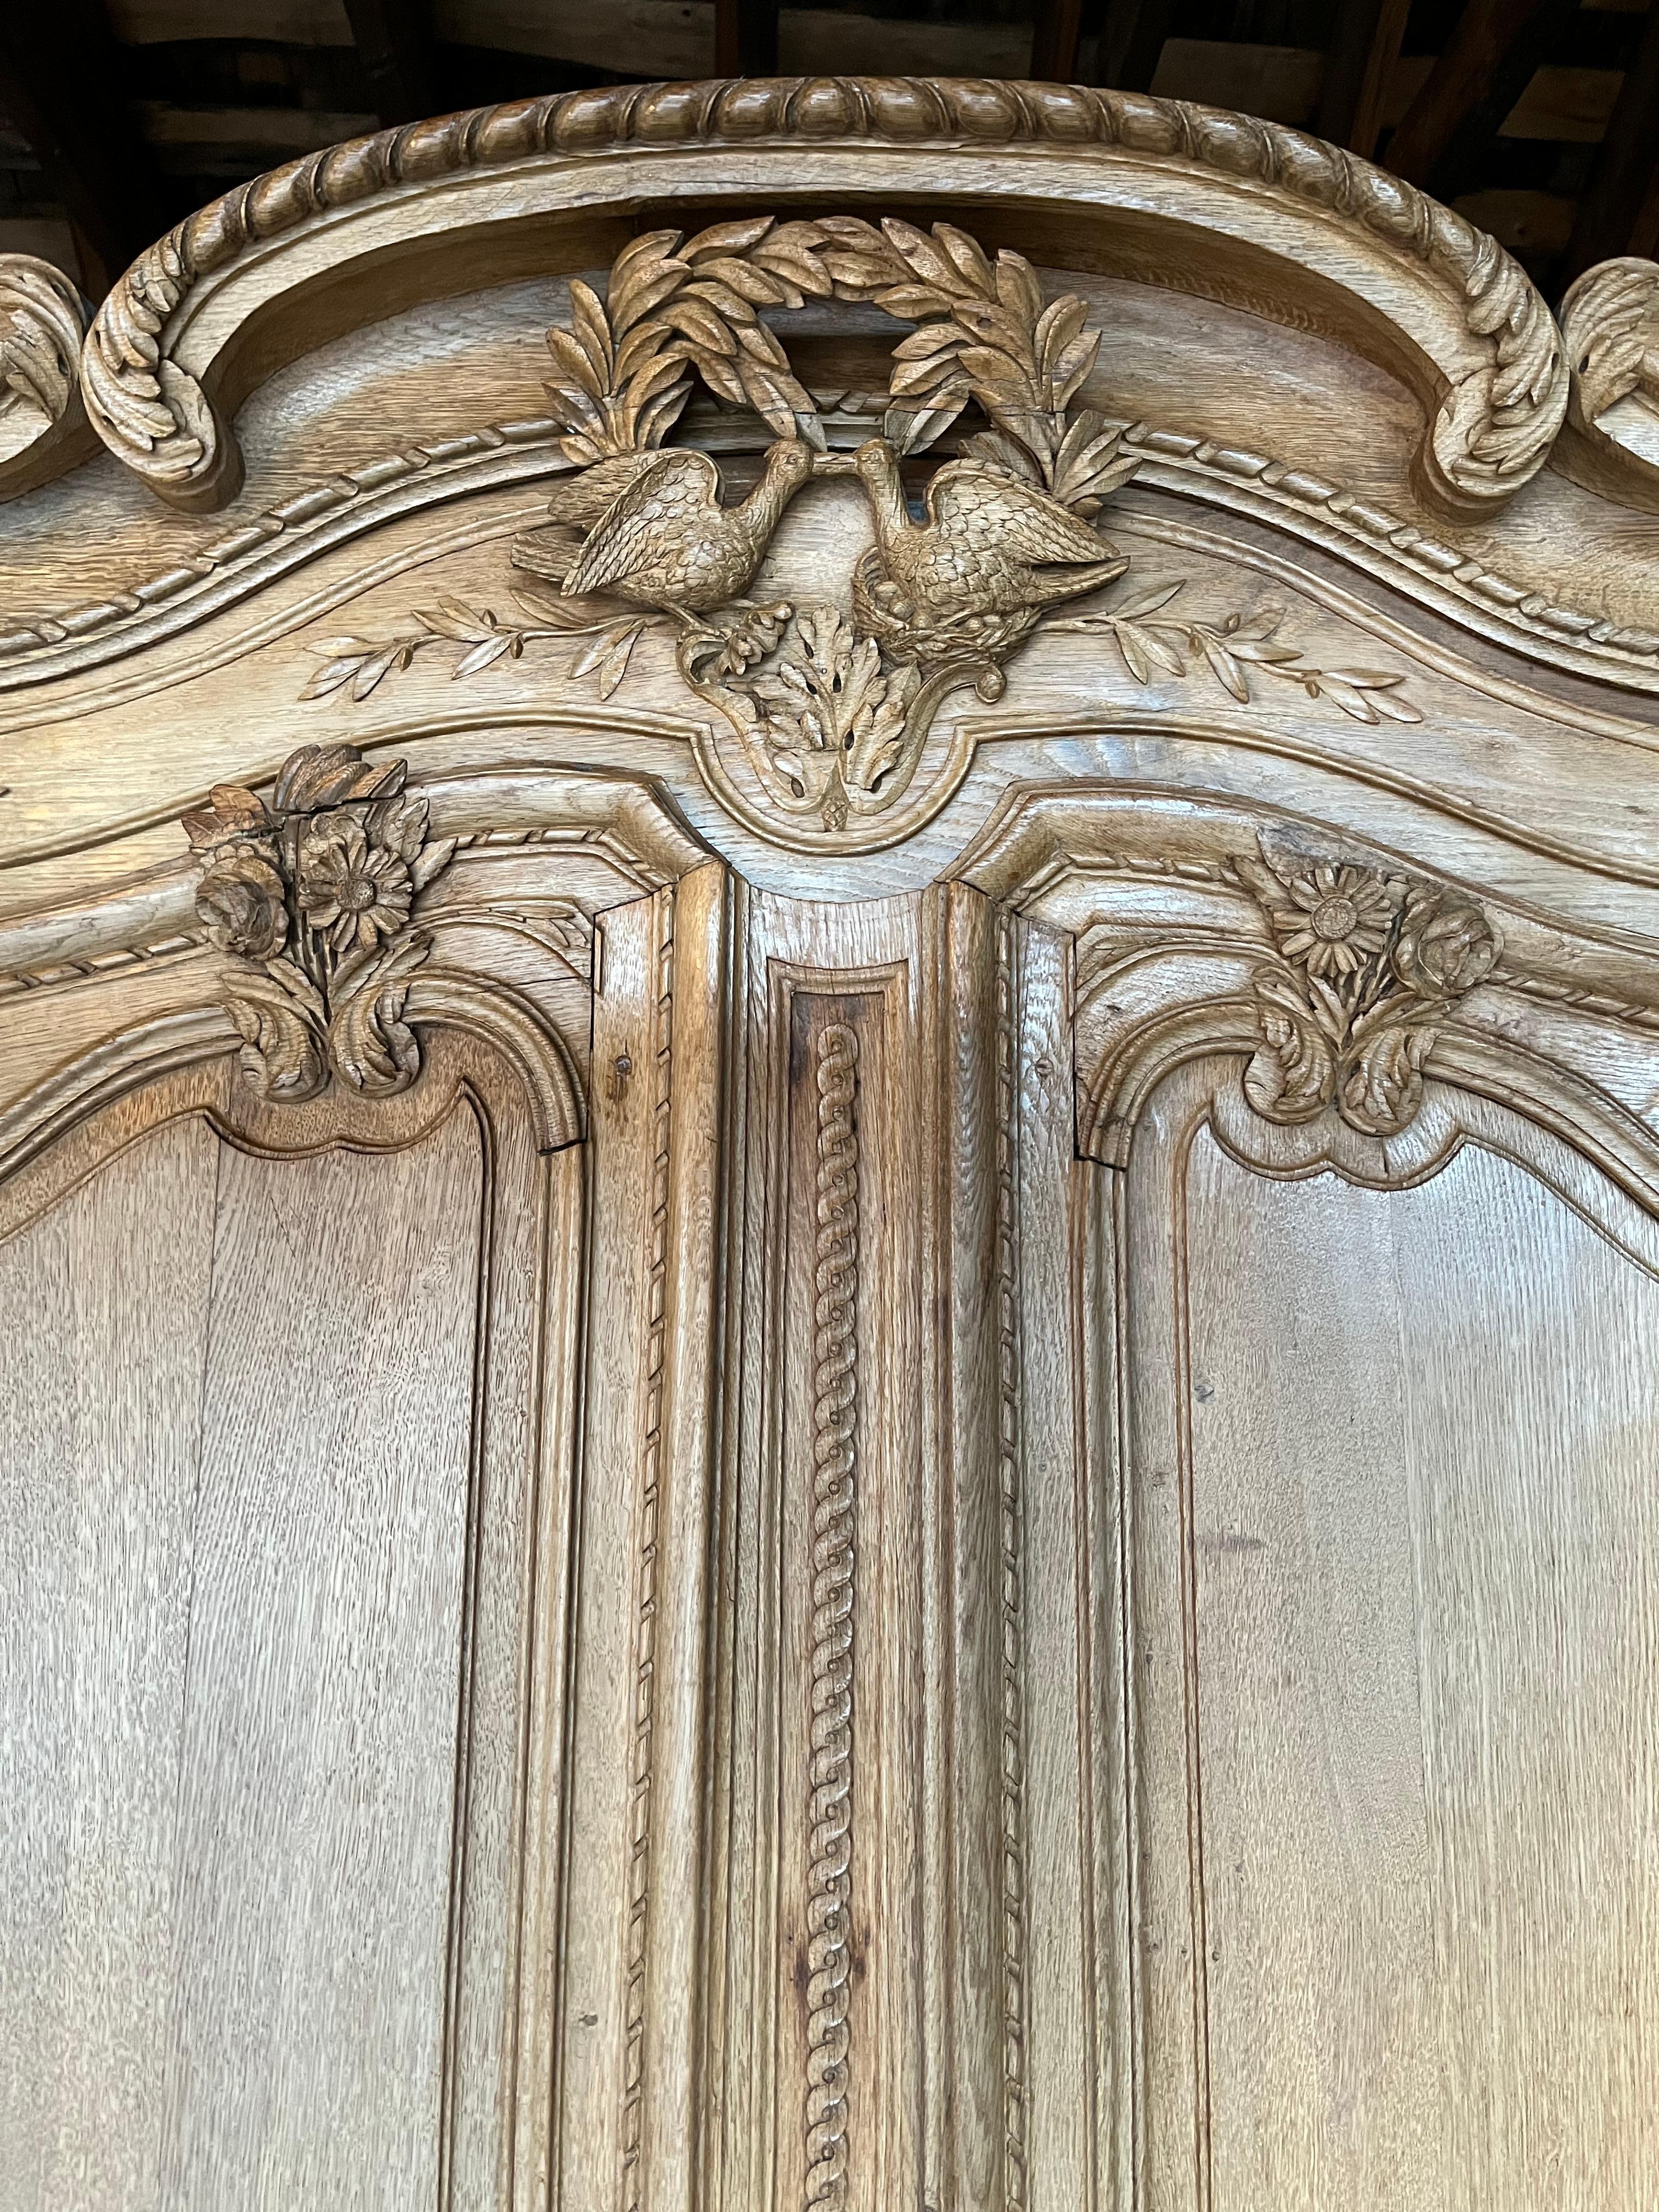 A very nice example of a traditional 18th century Normandy wedding armoire in bleached oak, abundantly carved with garden and floral motifs, with a central bouquet of love birds below the arched cornice. 
The piece retains its original lock and key